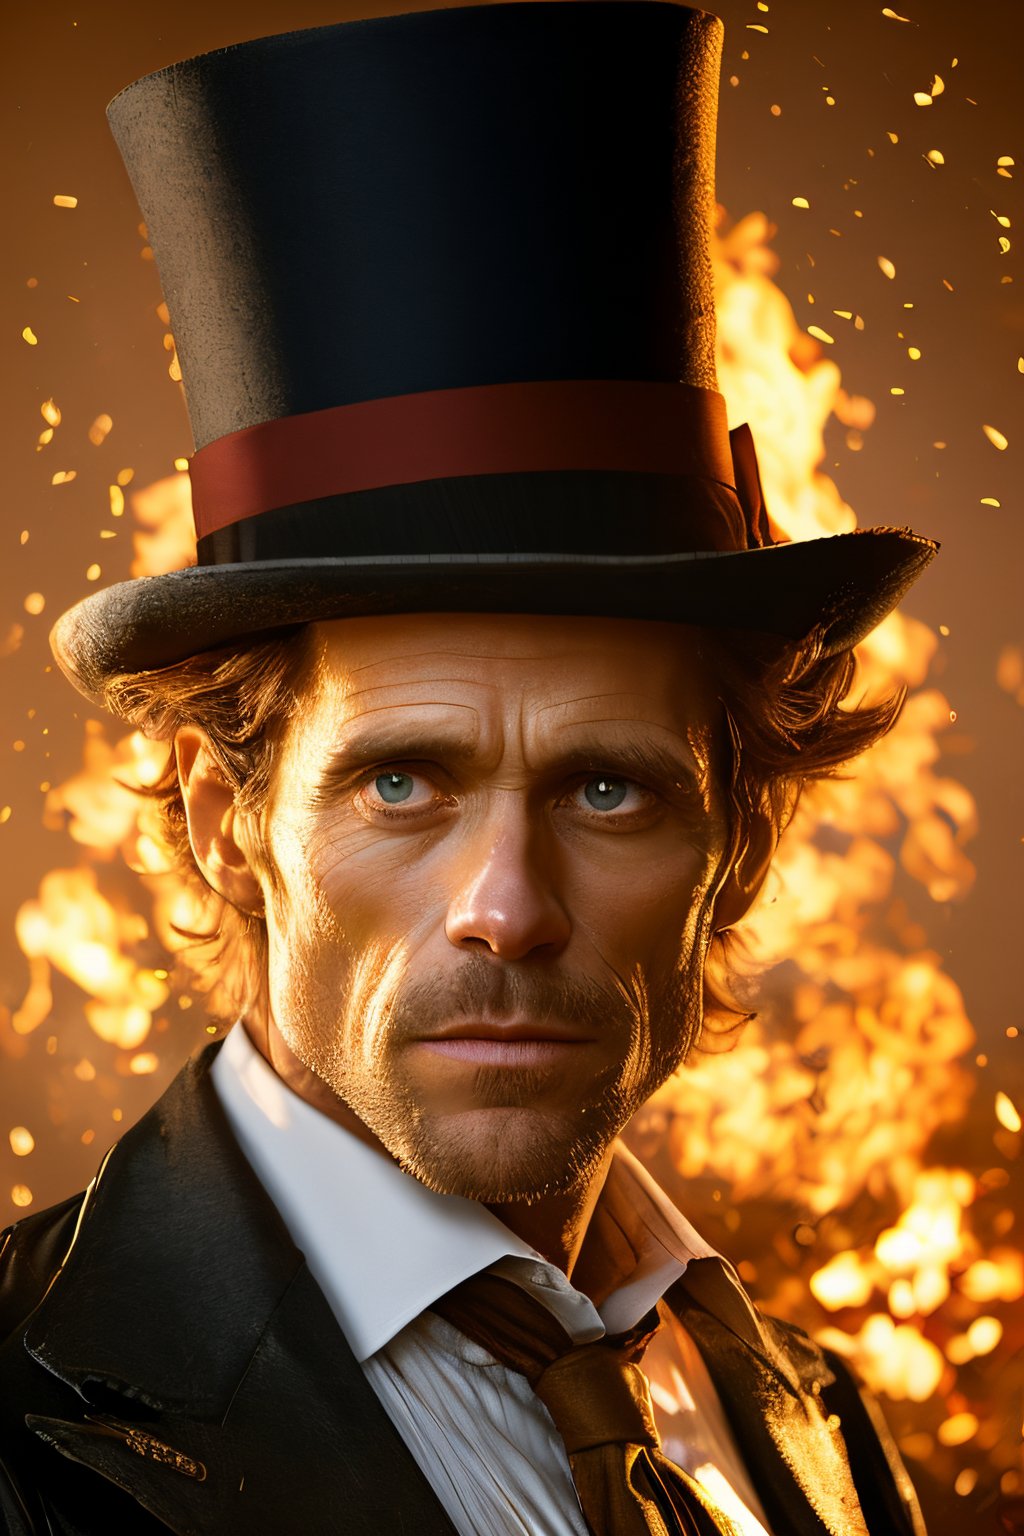 A close up of a man wearing a top hat,  john picacio and brom,  willem dafoe as scarecrow,  best of behance,  madhatter,  josan gonzalez and tyler edlin,  by Jack Davis, ,  character design,  embers,  bright bold colors,  macro lens,  dark fantasy,  decopunk,  cinematic,  dslr,  bokeh,  american horror story,  redneck